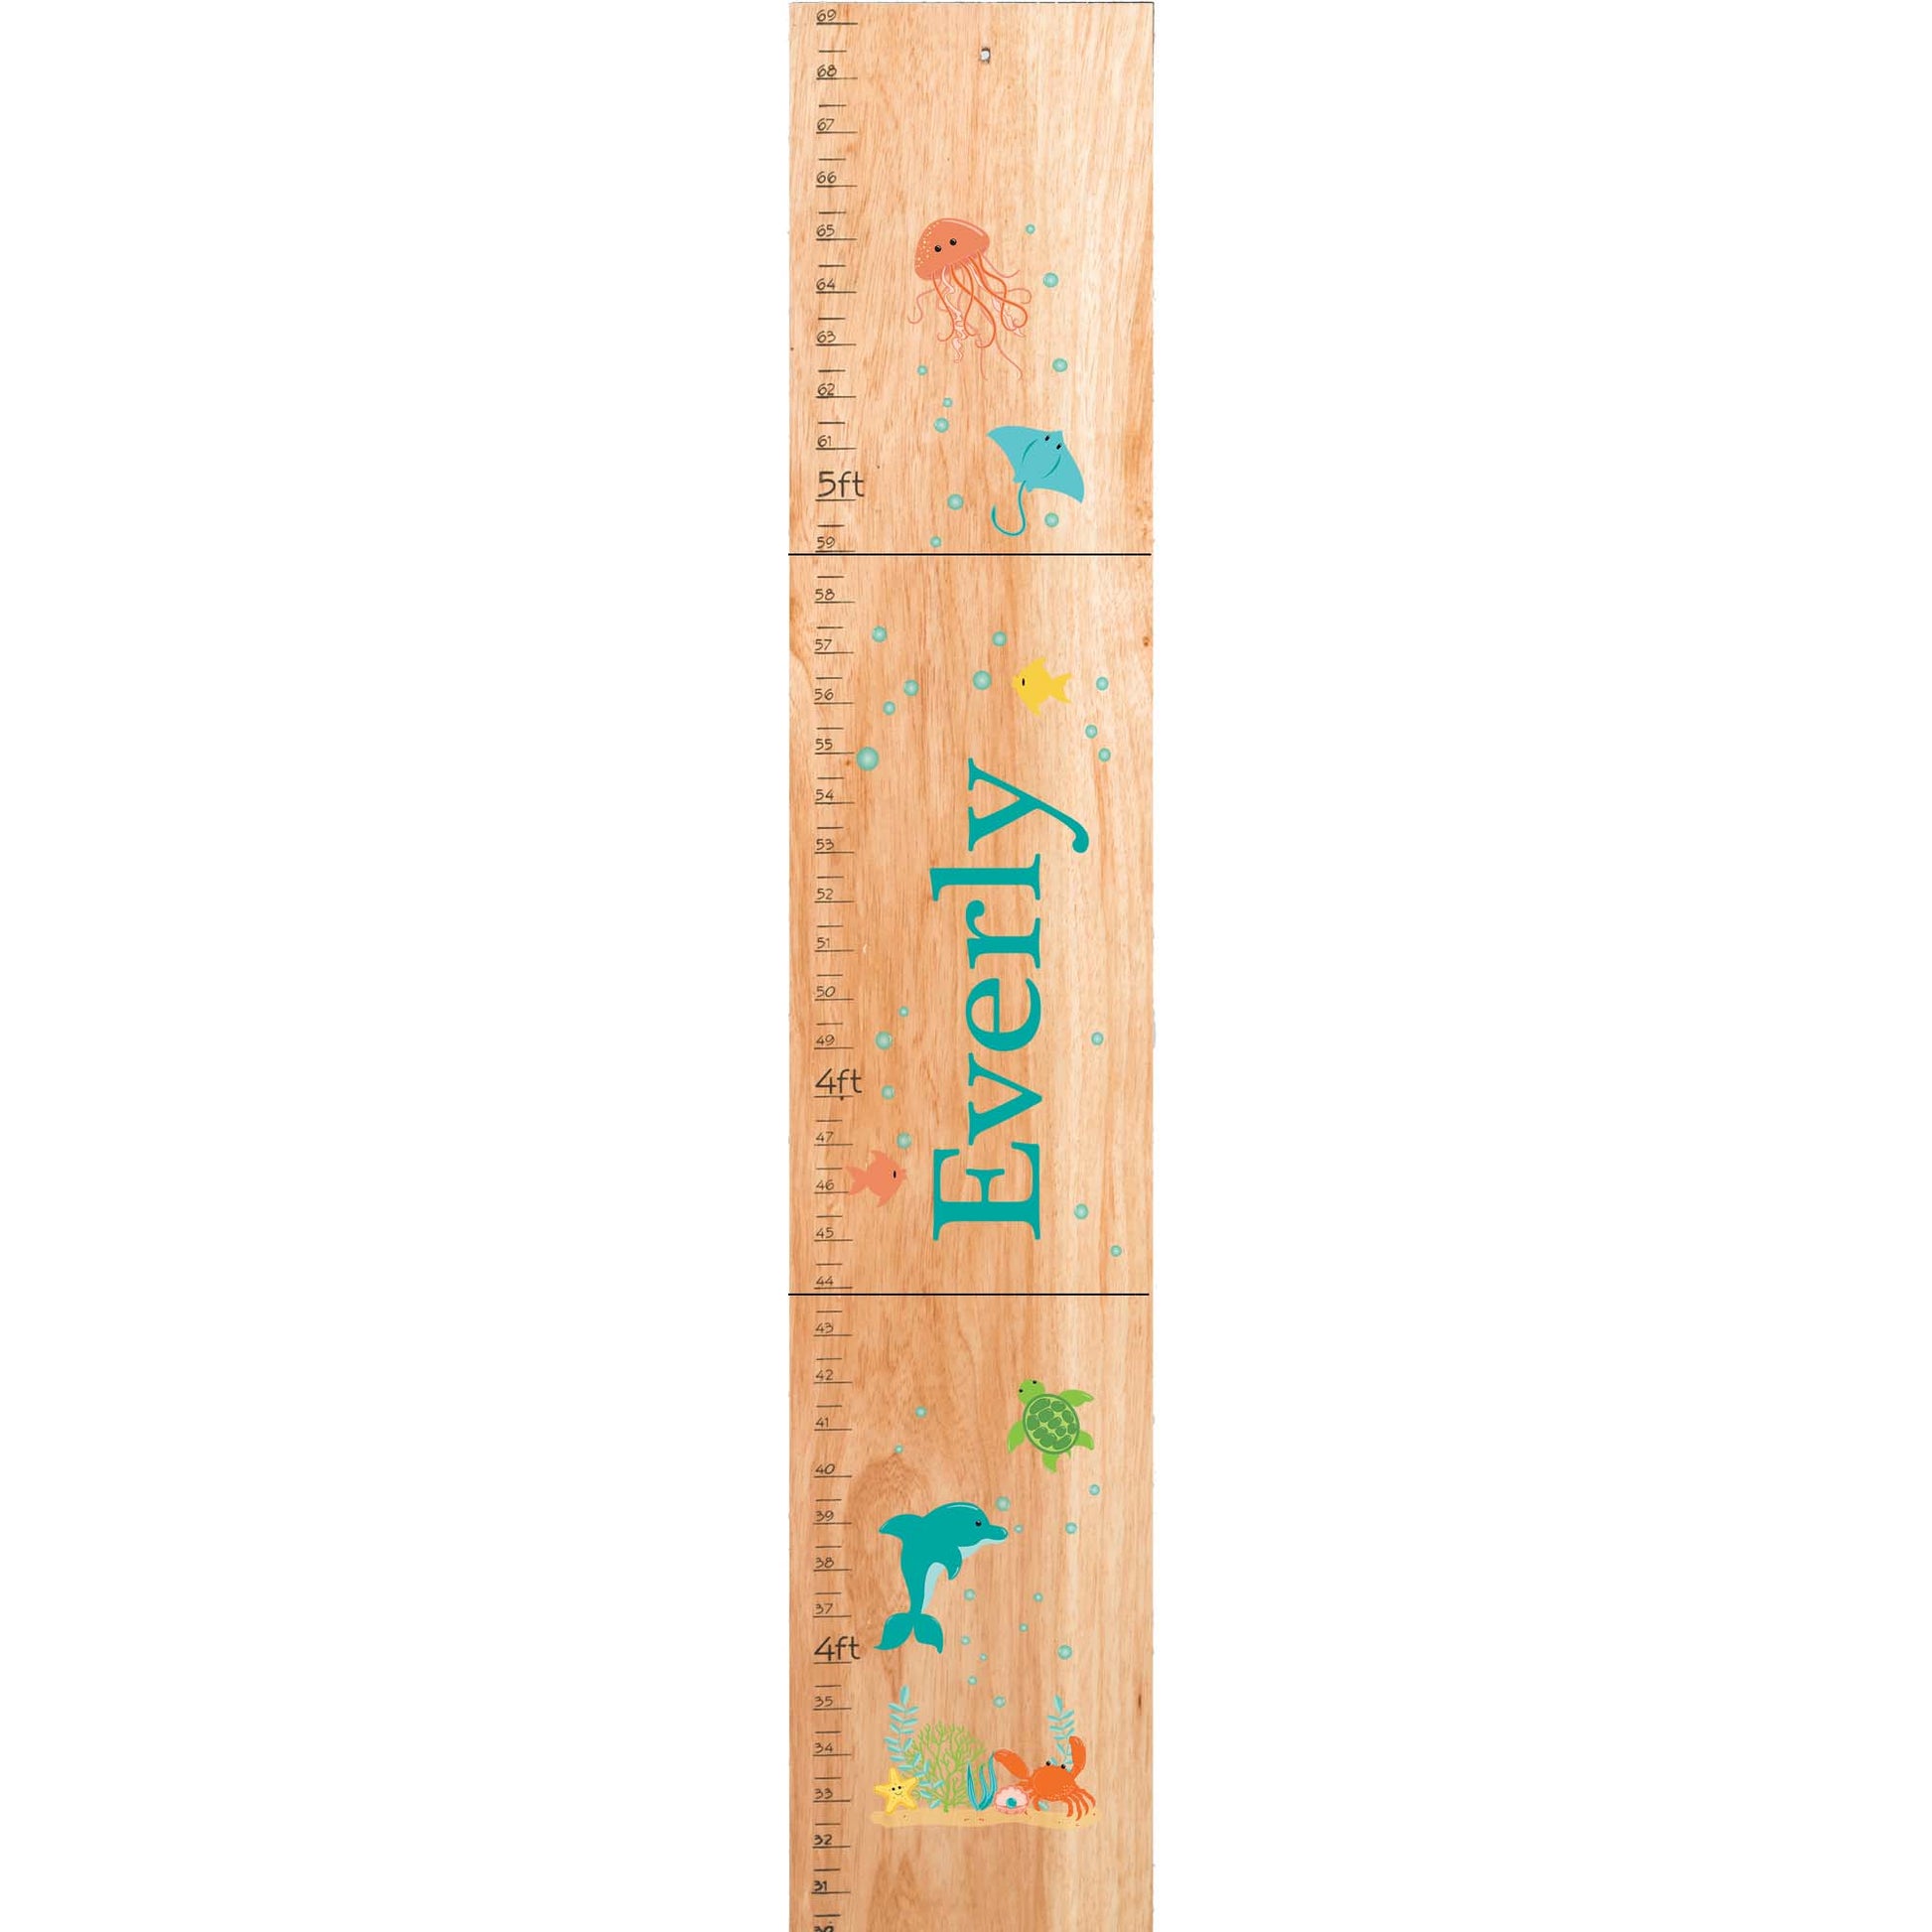 Personalized Natural Growth Chart With Rocket Design